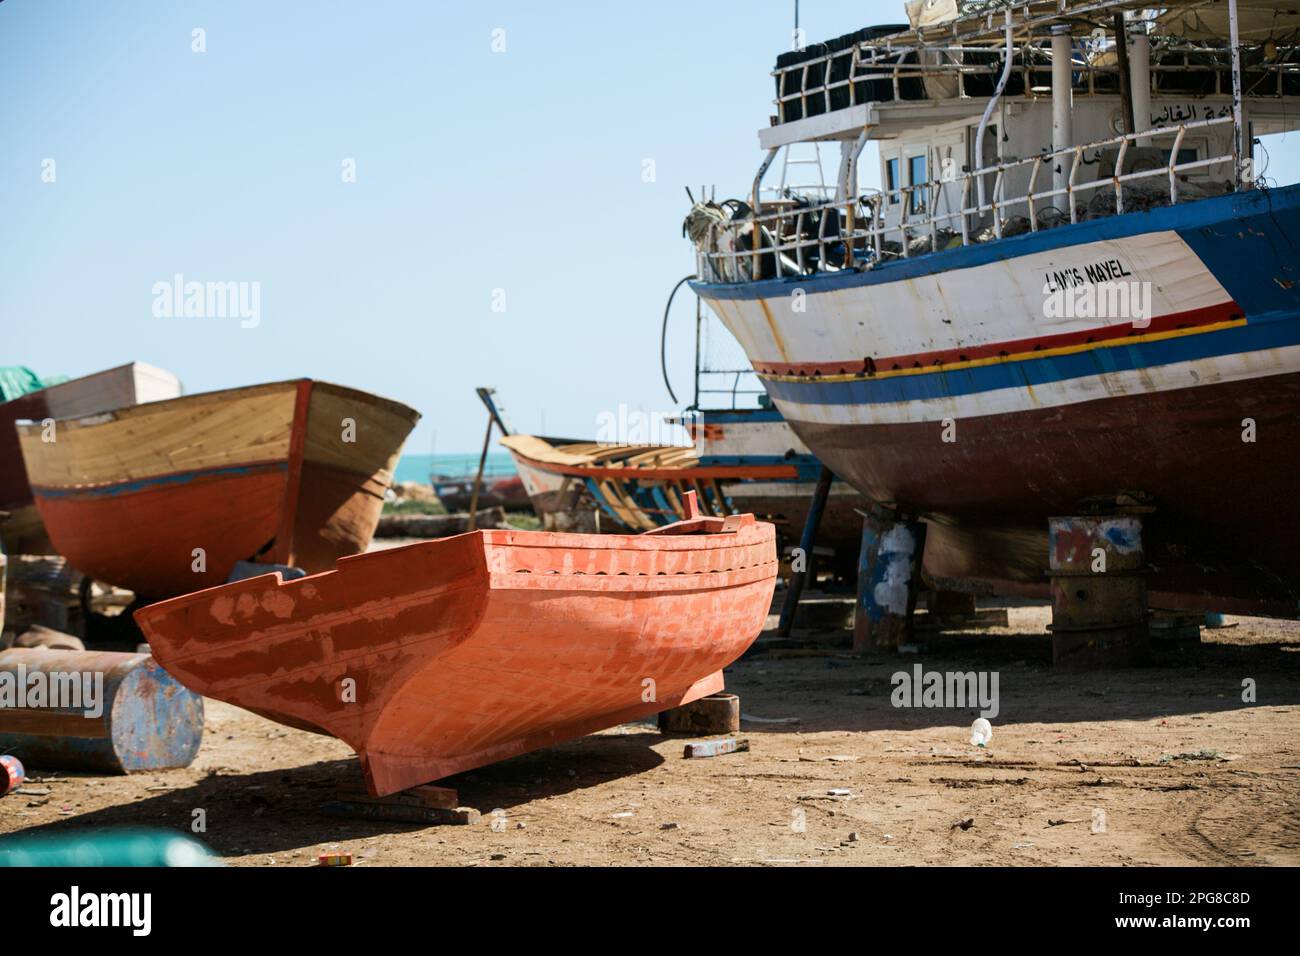 Final design of a newly developed small fishing boat on March 18, 2023, in  Zarzis, Mednine, Tunisia. The coastal town of Zarzis has a long-standing  tradition of manufacturing and repairing wood fishing